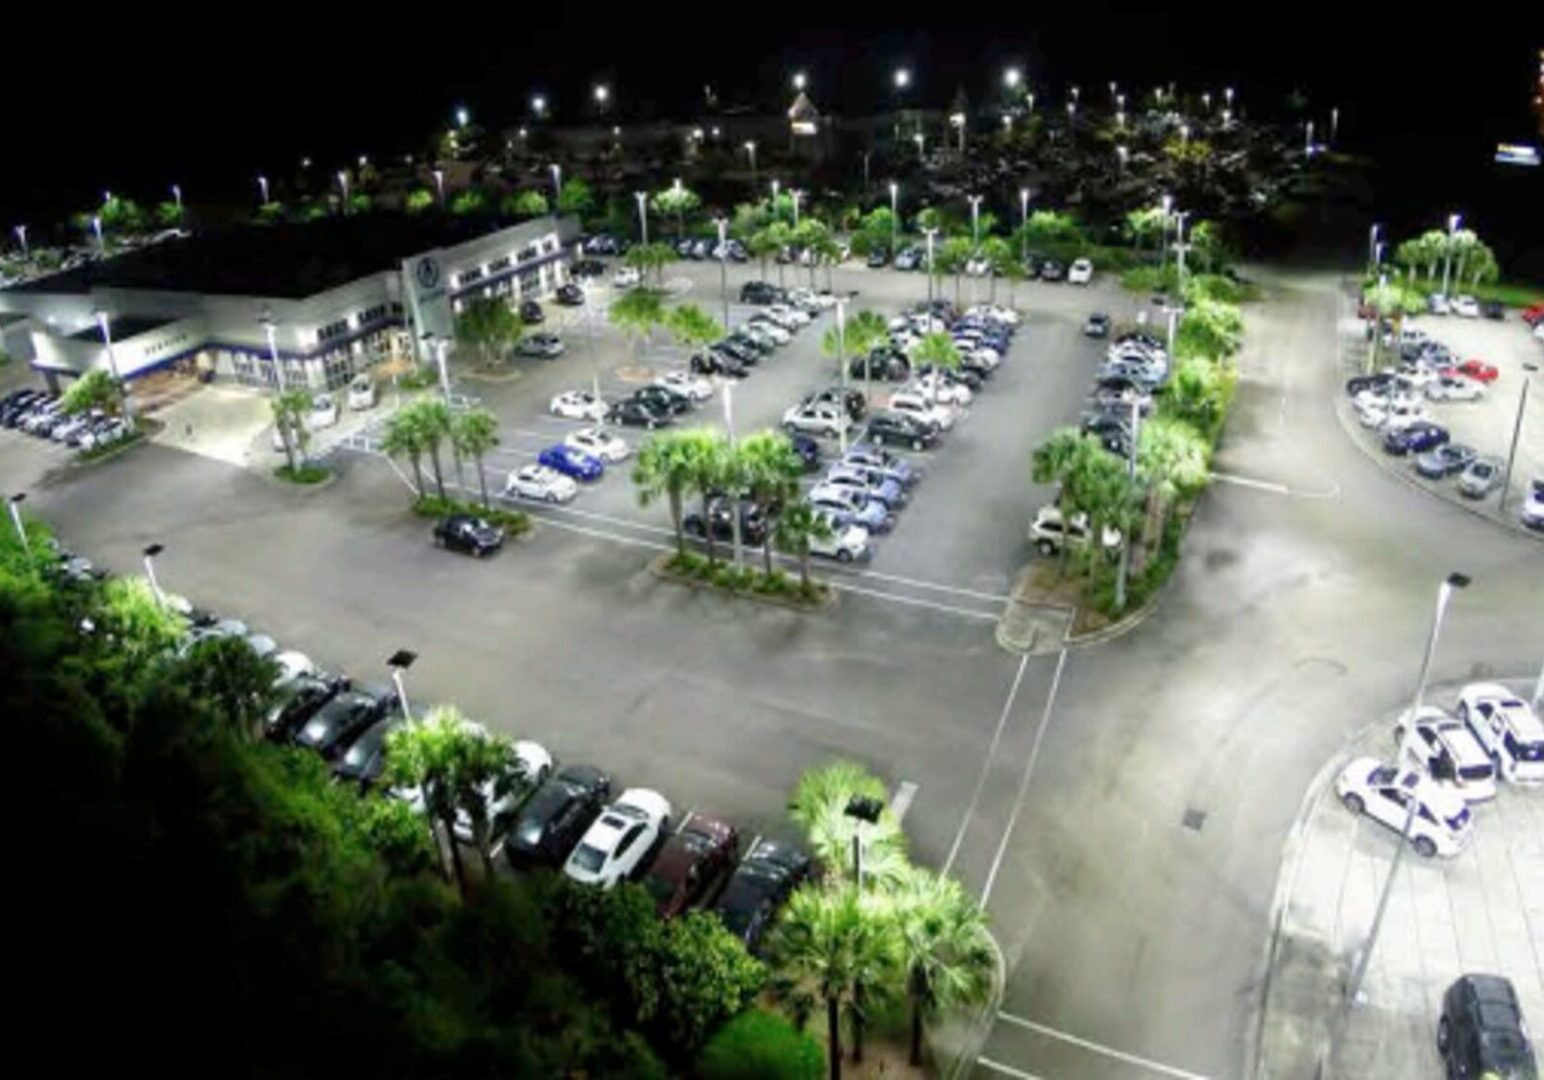 A parking lot with many cars parked in it